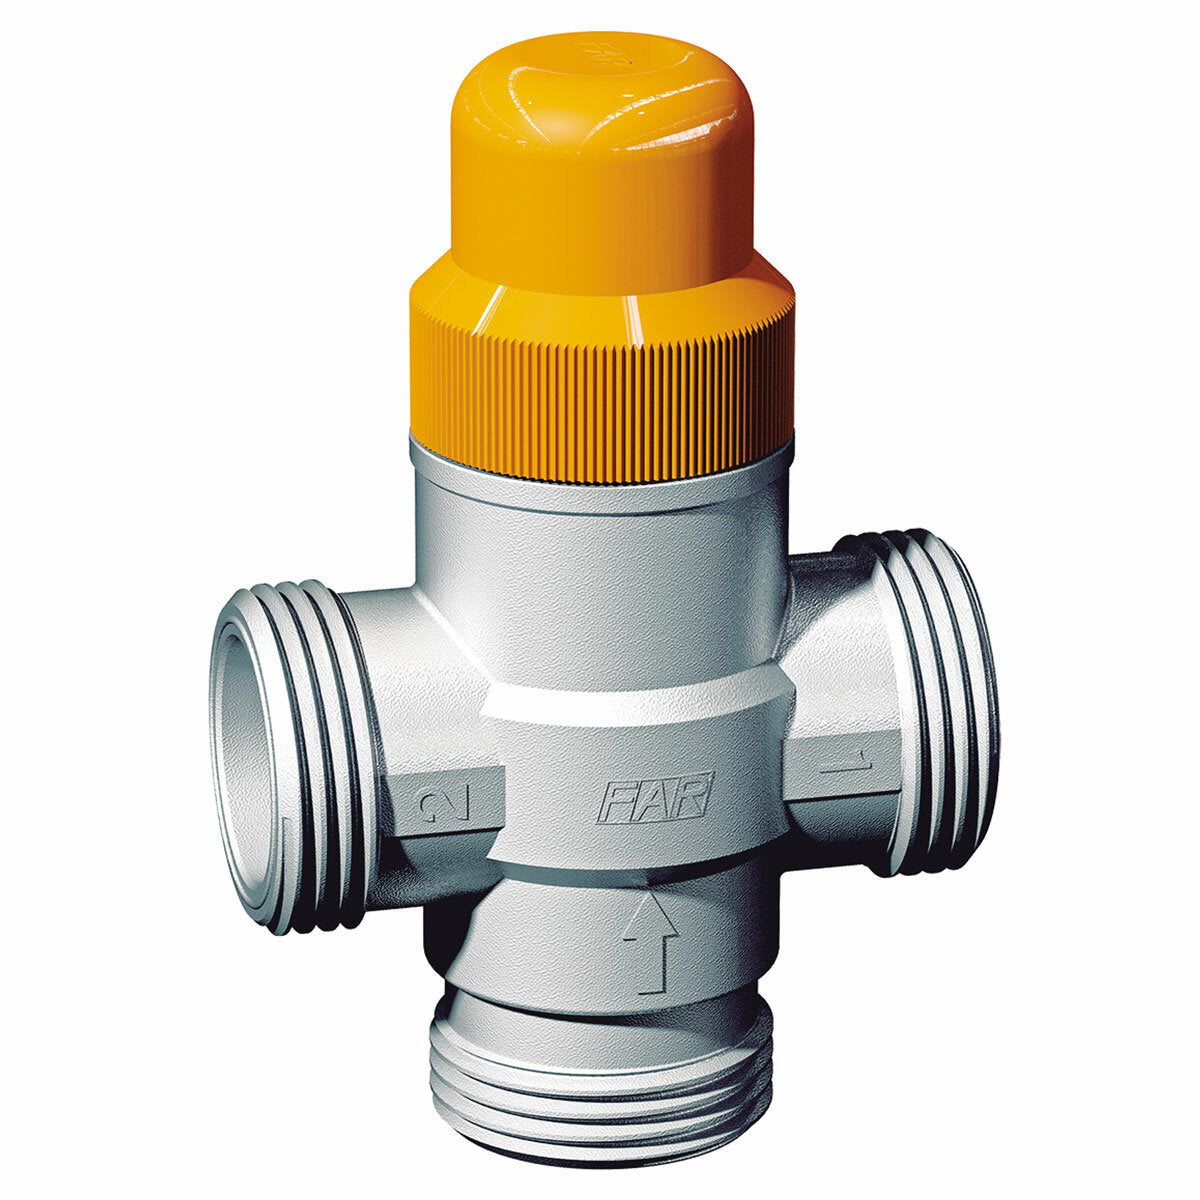 FAR thermostatic diverter for solar systems 1"